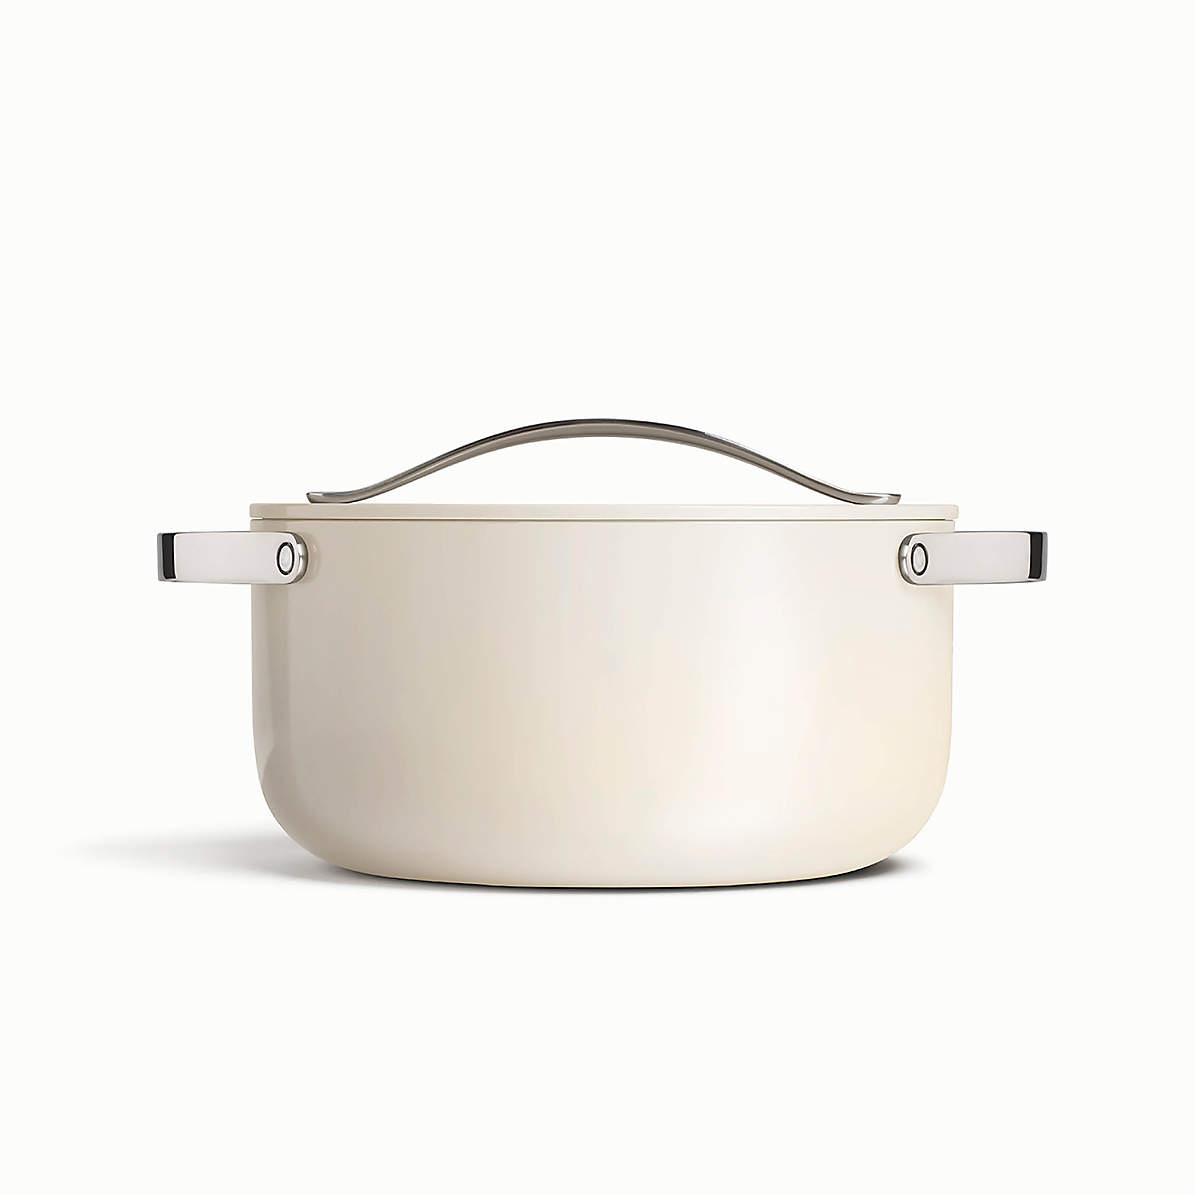 Caraway Nonstick Dutch Oven Pot Giveaway • Steamy Kitchen Recipes Giveaways